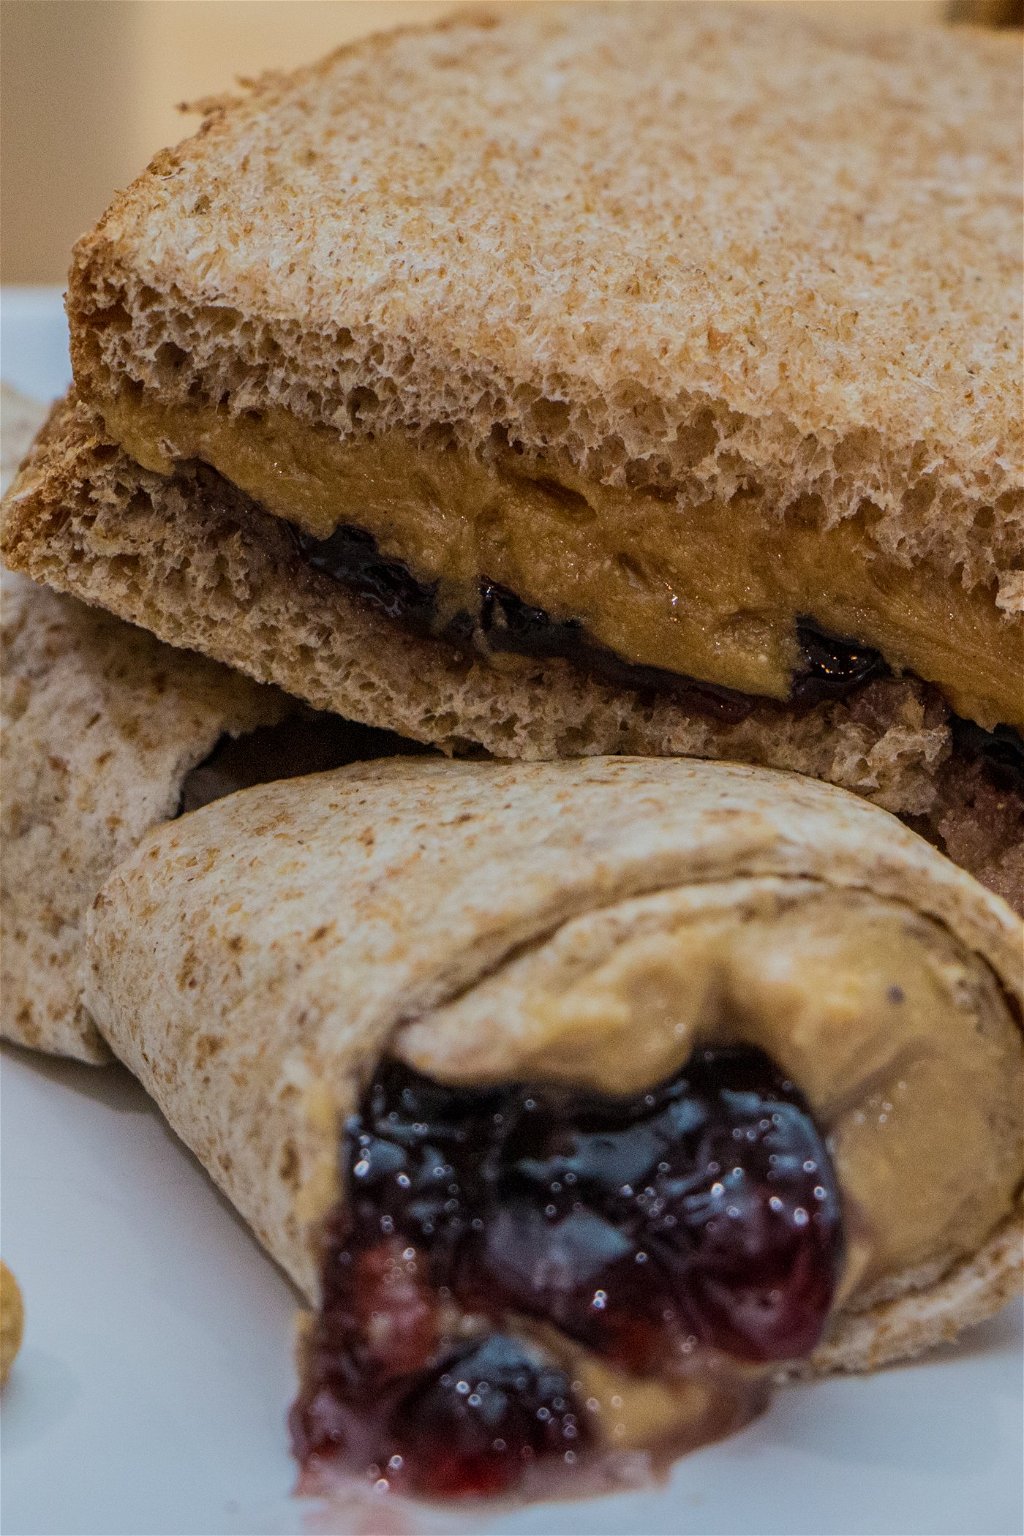 Protein Peanut Butter & Jelly Sandwiches The Protein